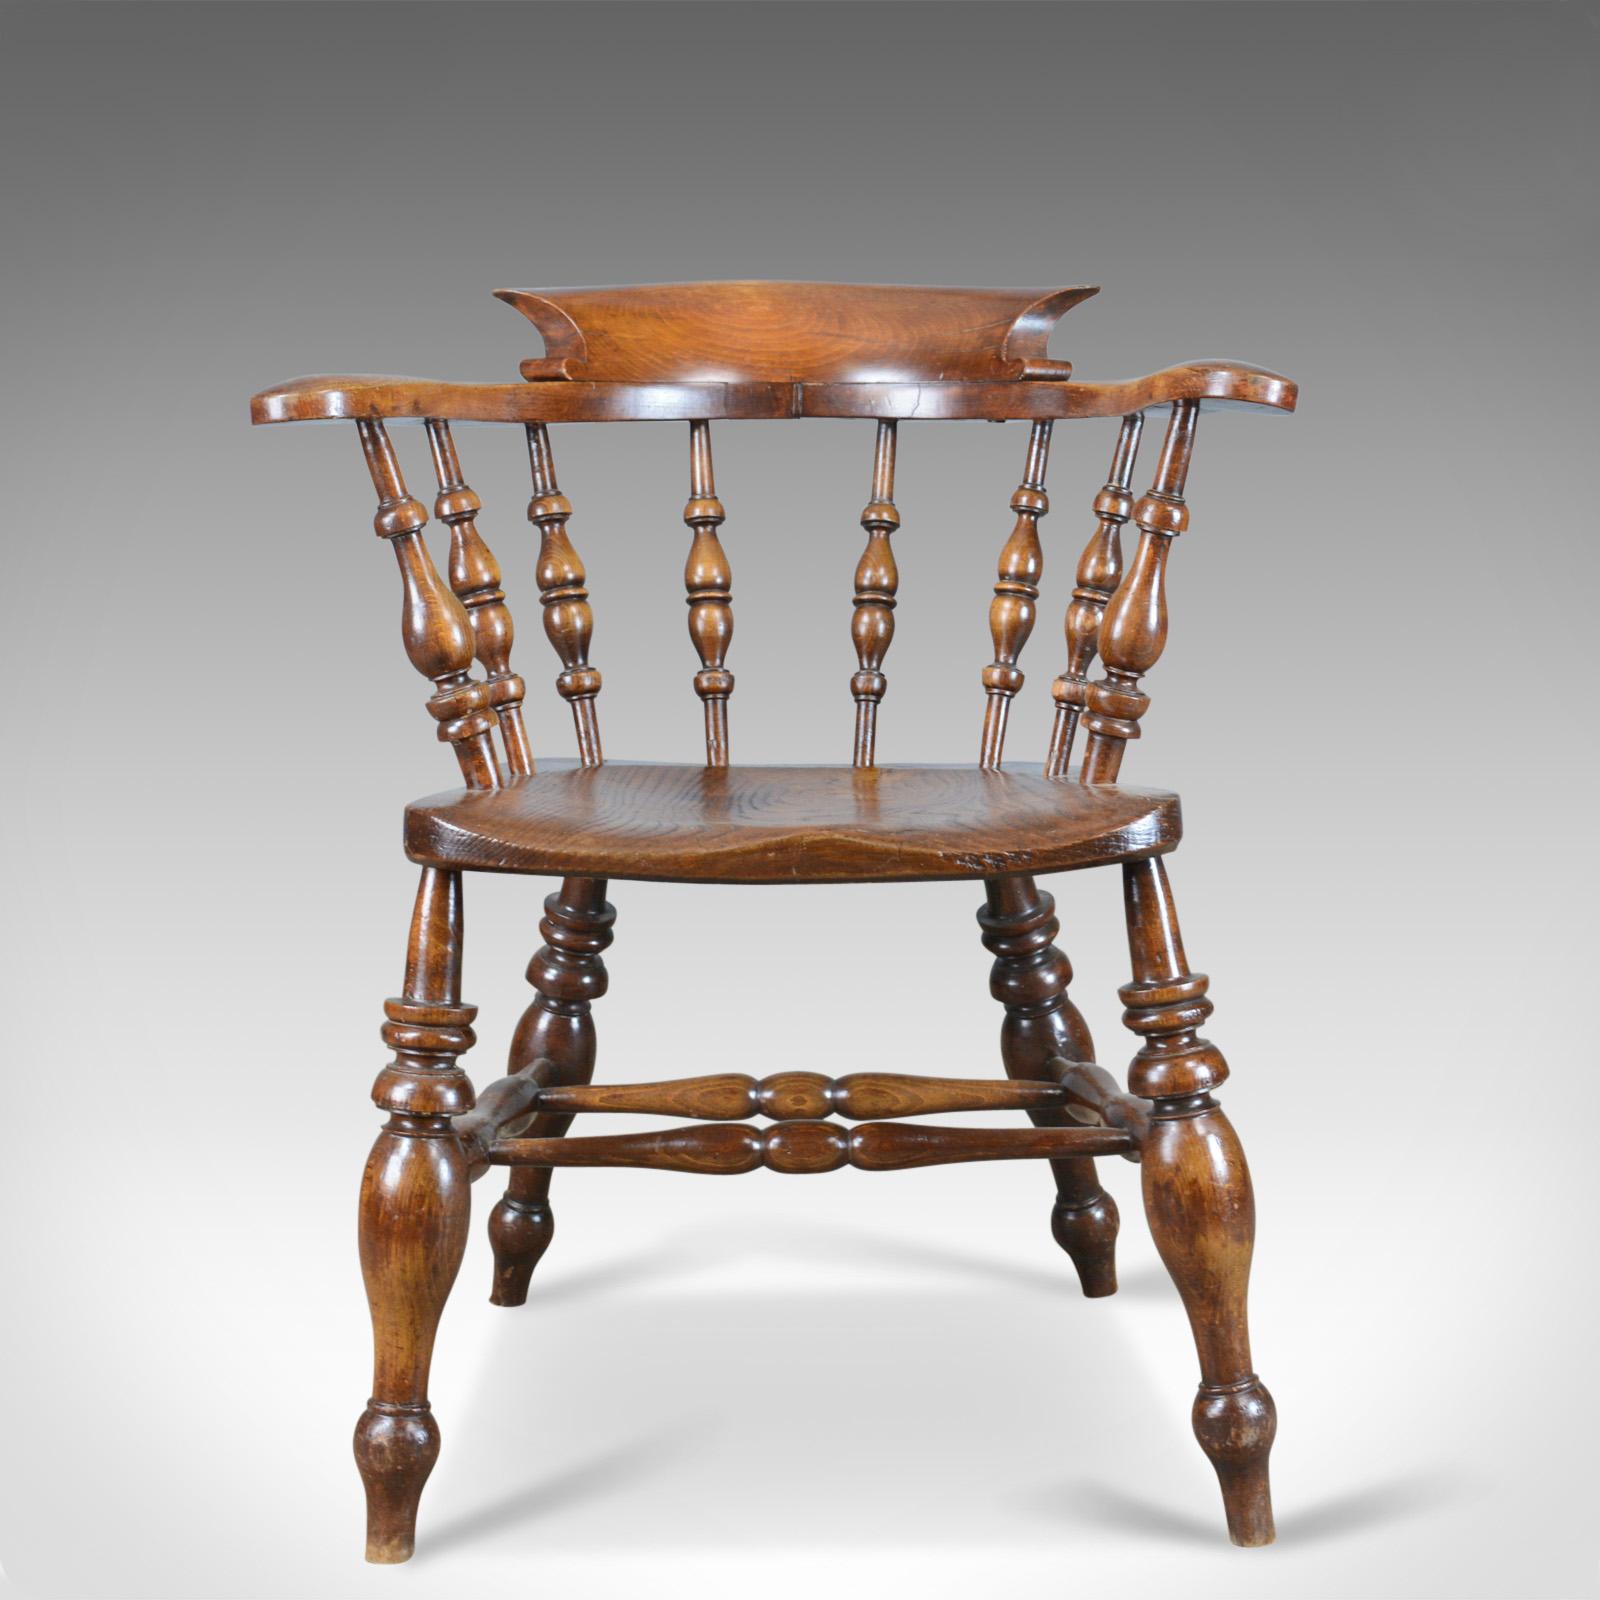 This is an antique, bow-back chair, sometimes referred to as a 'Smoker's' or 'Captain's' chair. An English, Victorian, elm, Windsor piece from the 19th century, circa 1880. 

Attractive deep, rich tones to the elm with a desirable aged